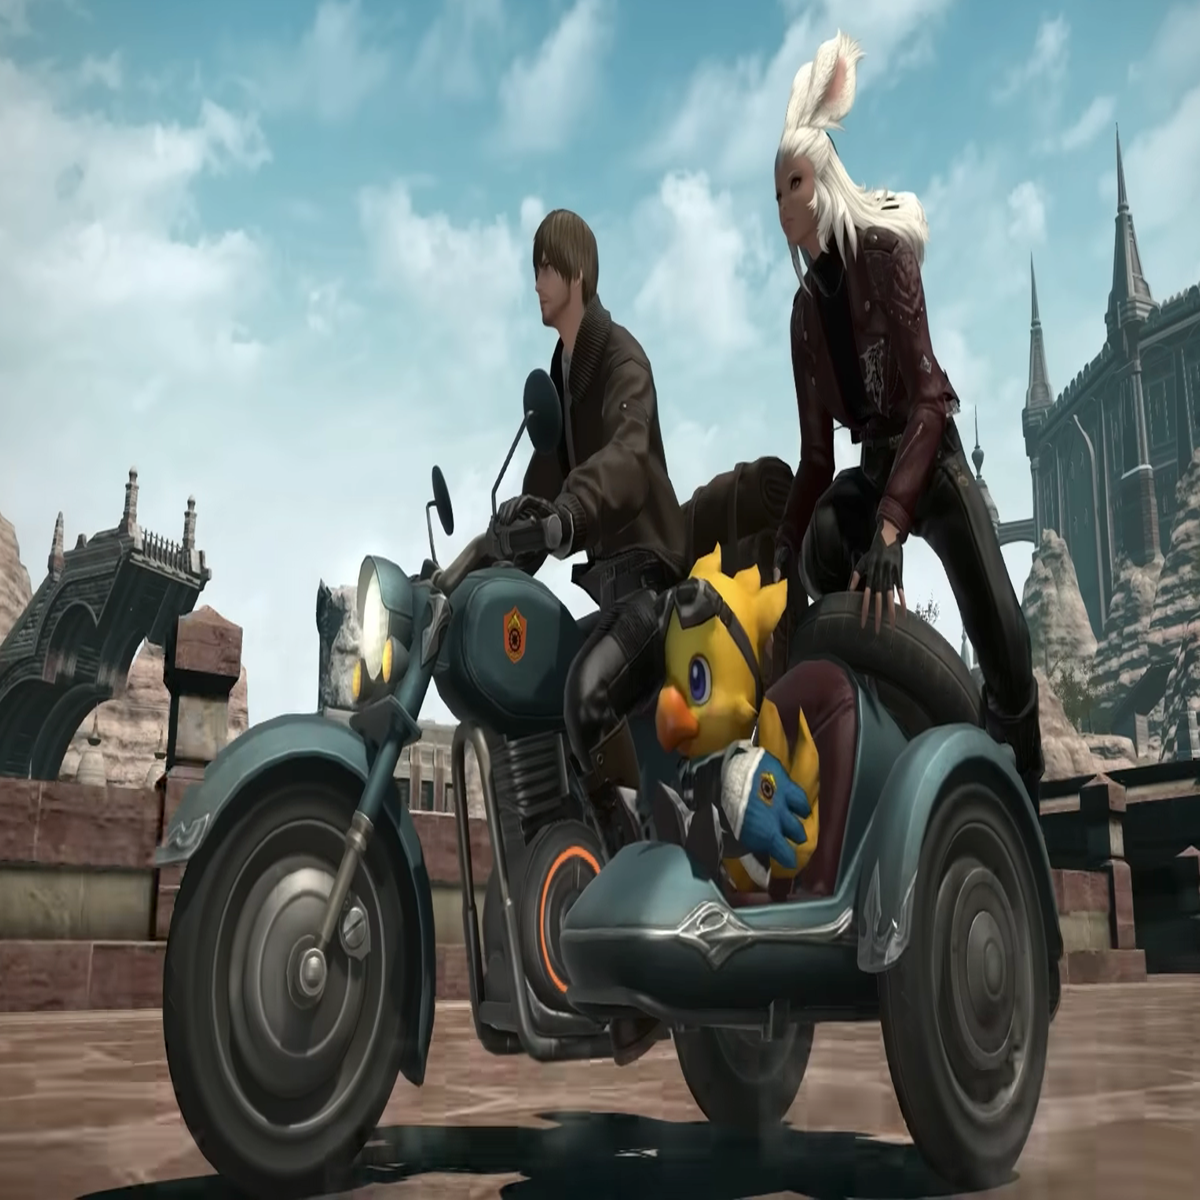 Final Fantasy 14's new motorcycle mount has its adorable chocobo